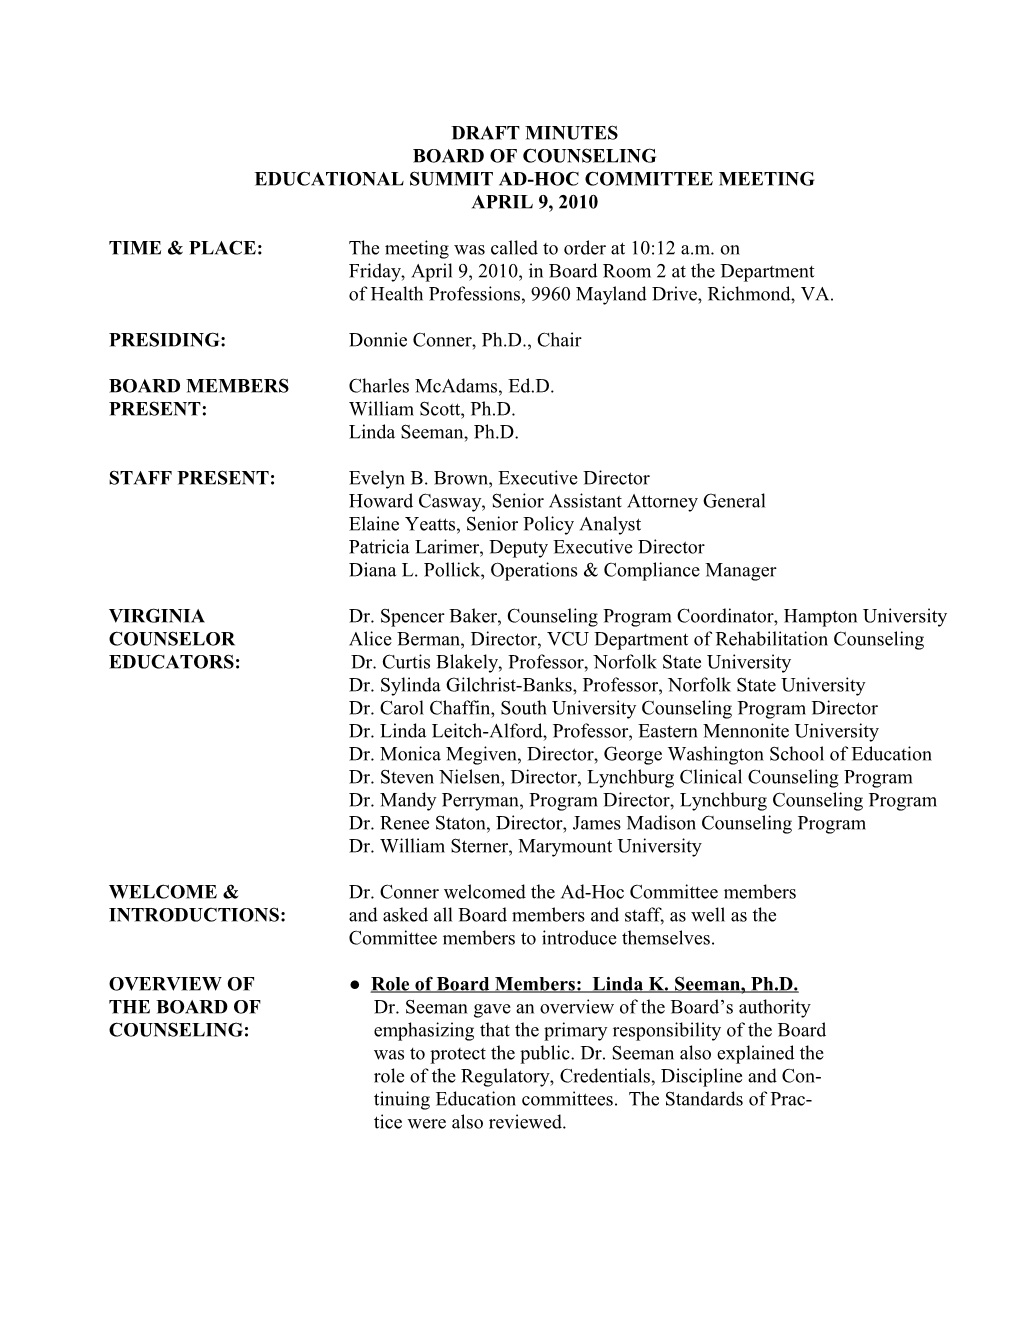 BOARD of COUNSELING Minutes 4-9-2010